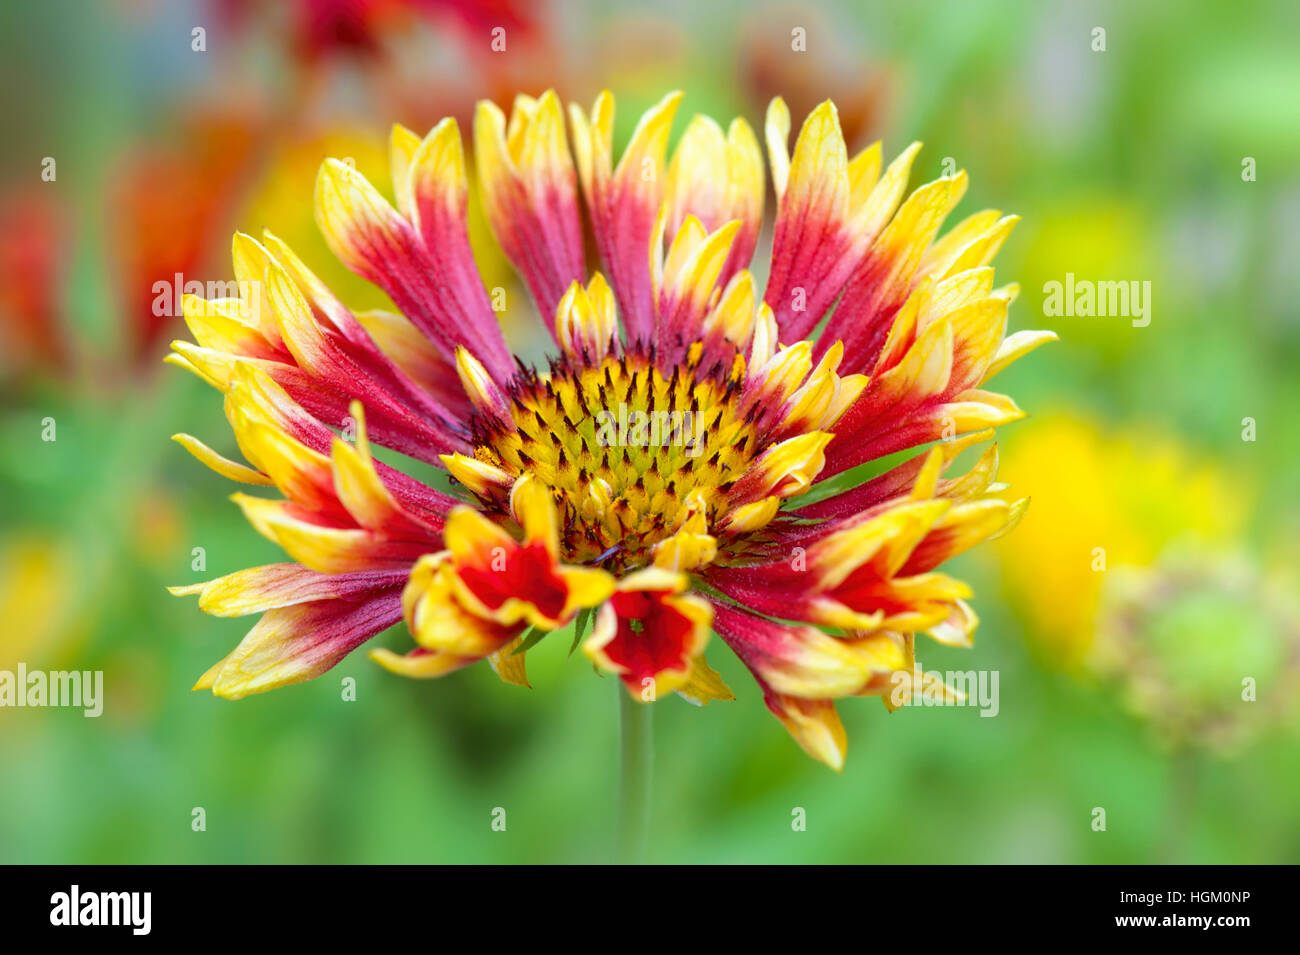 Close-up of a vibrant red and yellow, summer flowering Gaillardia, also known as the Blanket Flower, soft background Stock Photo